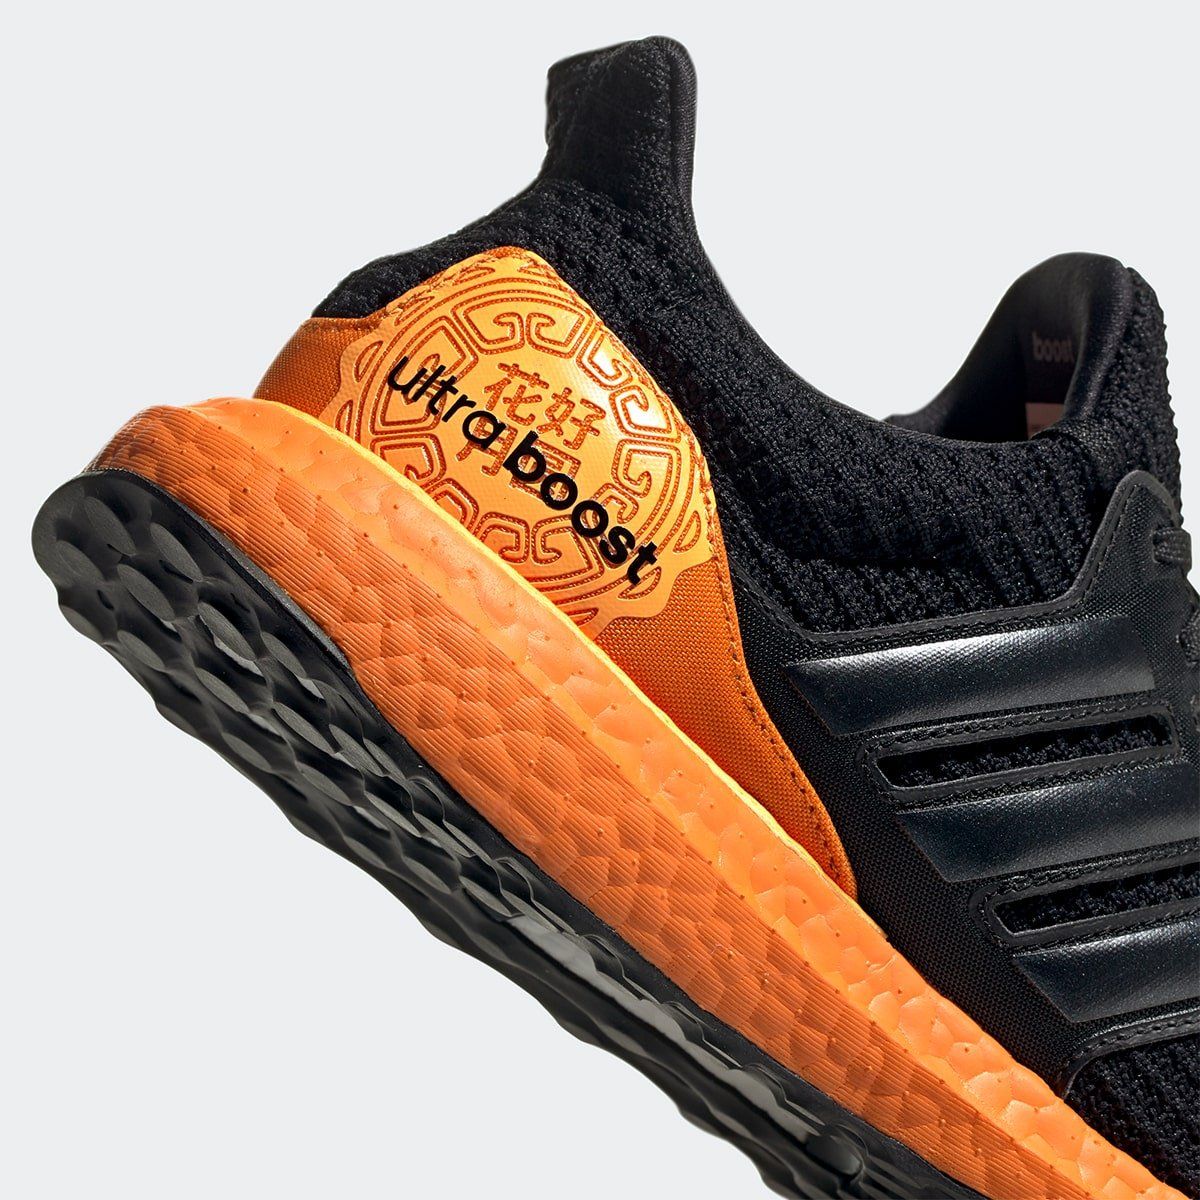 Read bush See through adidas Celebrate China's Annual Moon Festival on the Ultra BOOST 4.0 |  HOUSE OF HEAT